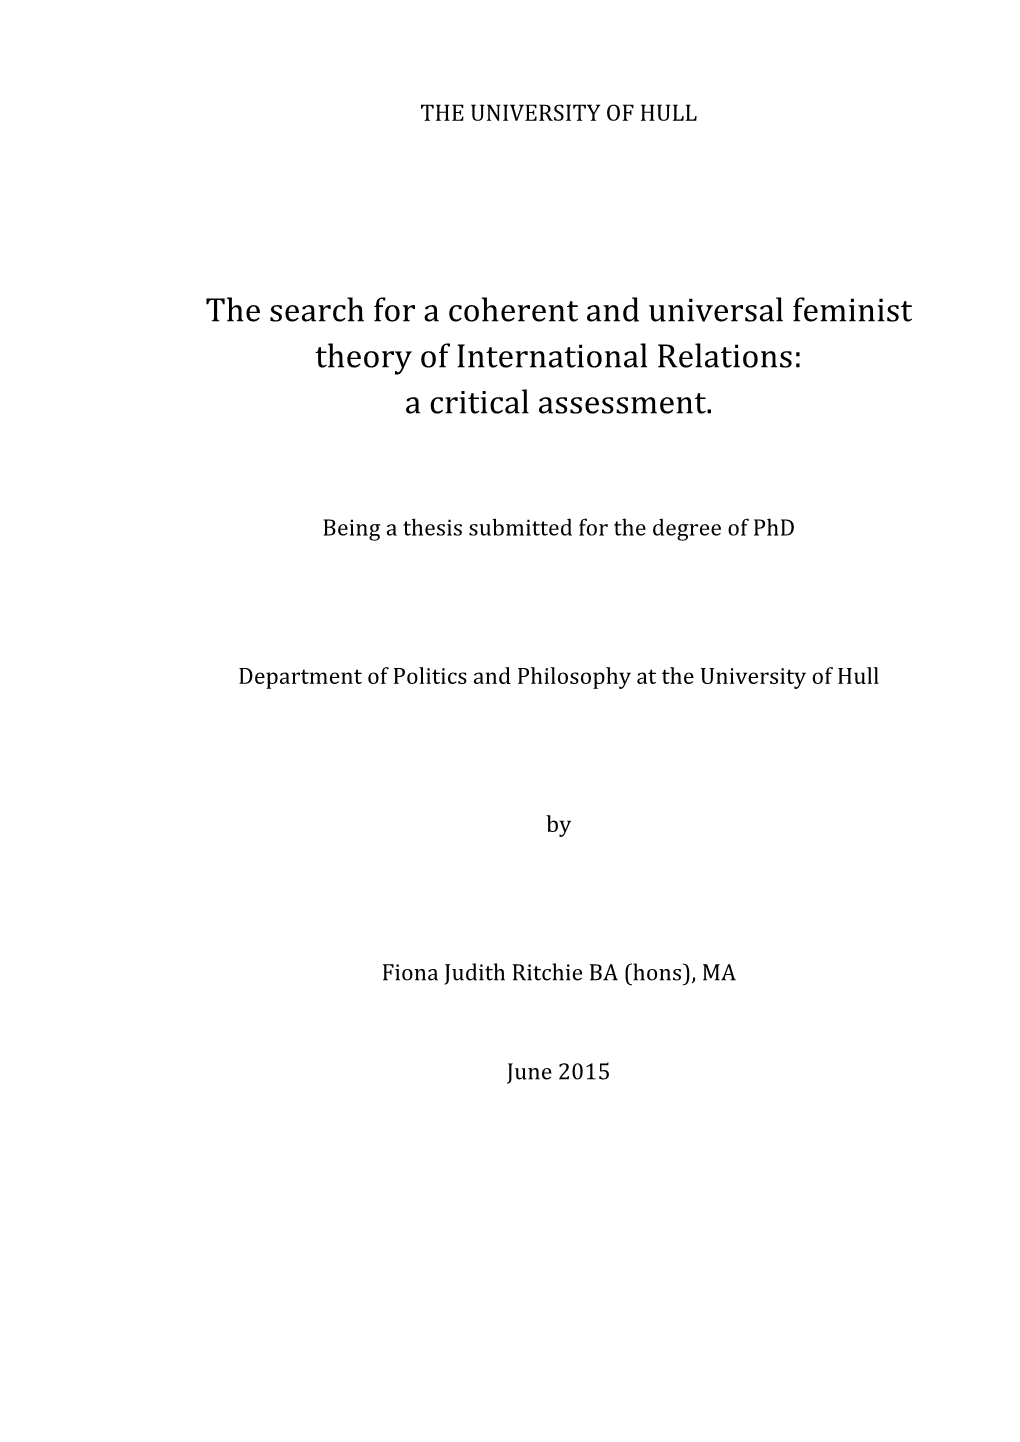 The Search for a Coherent and Universal Feminist Theory of International Relations